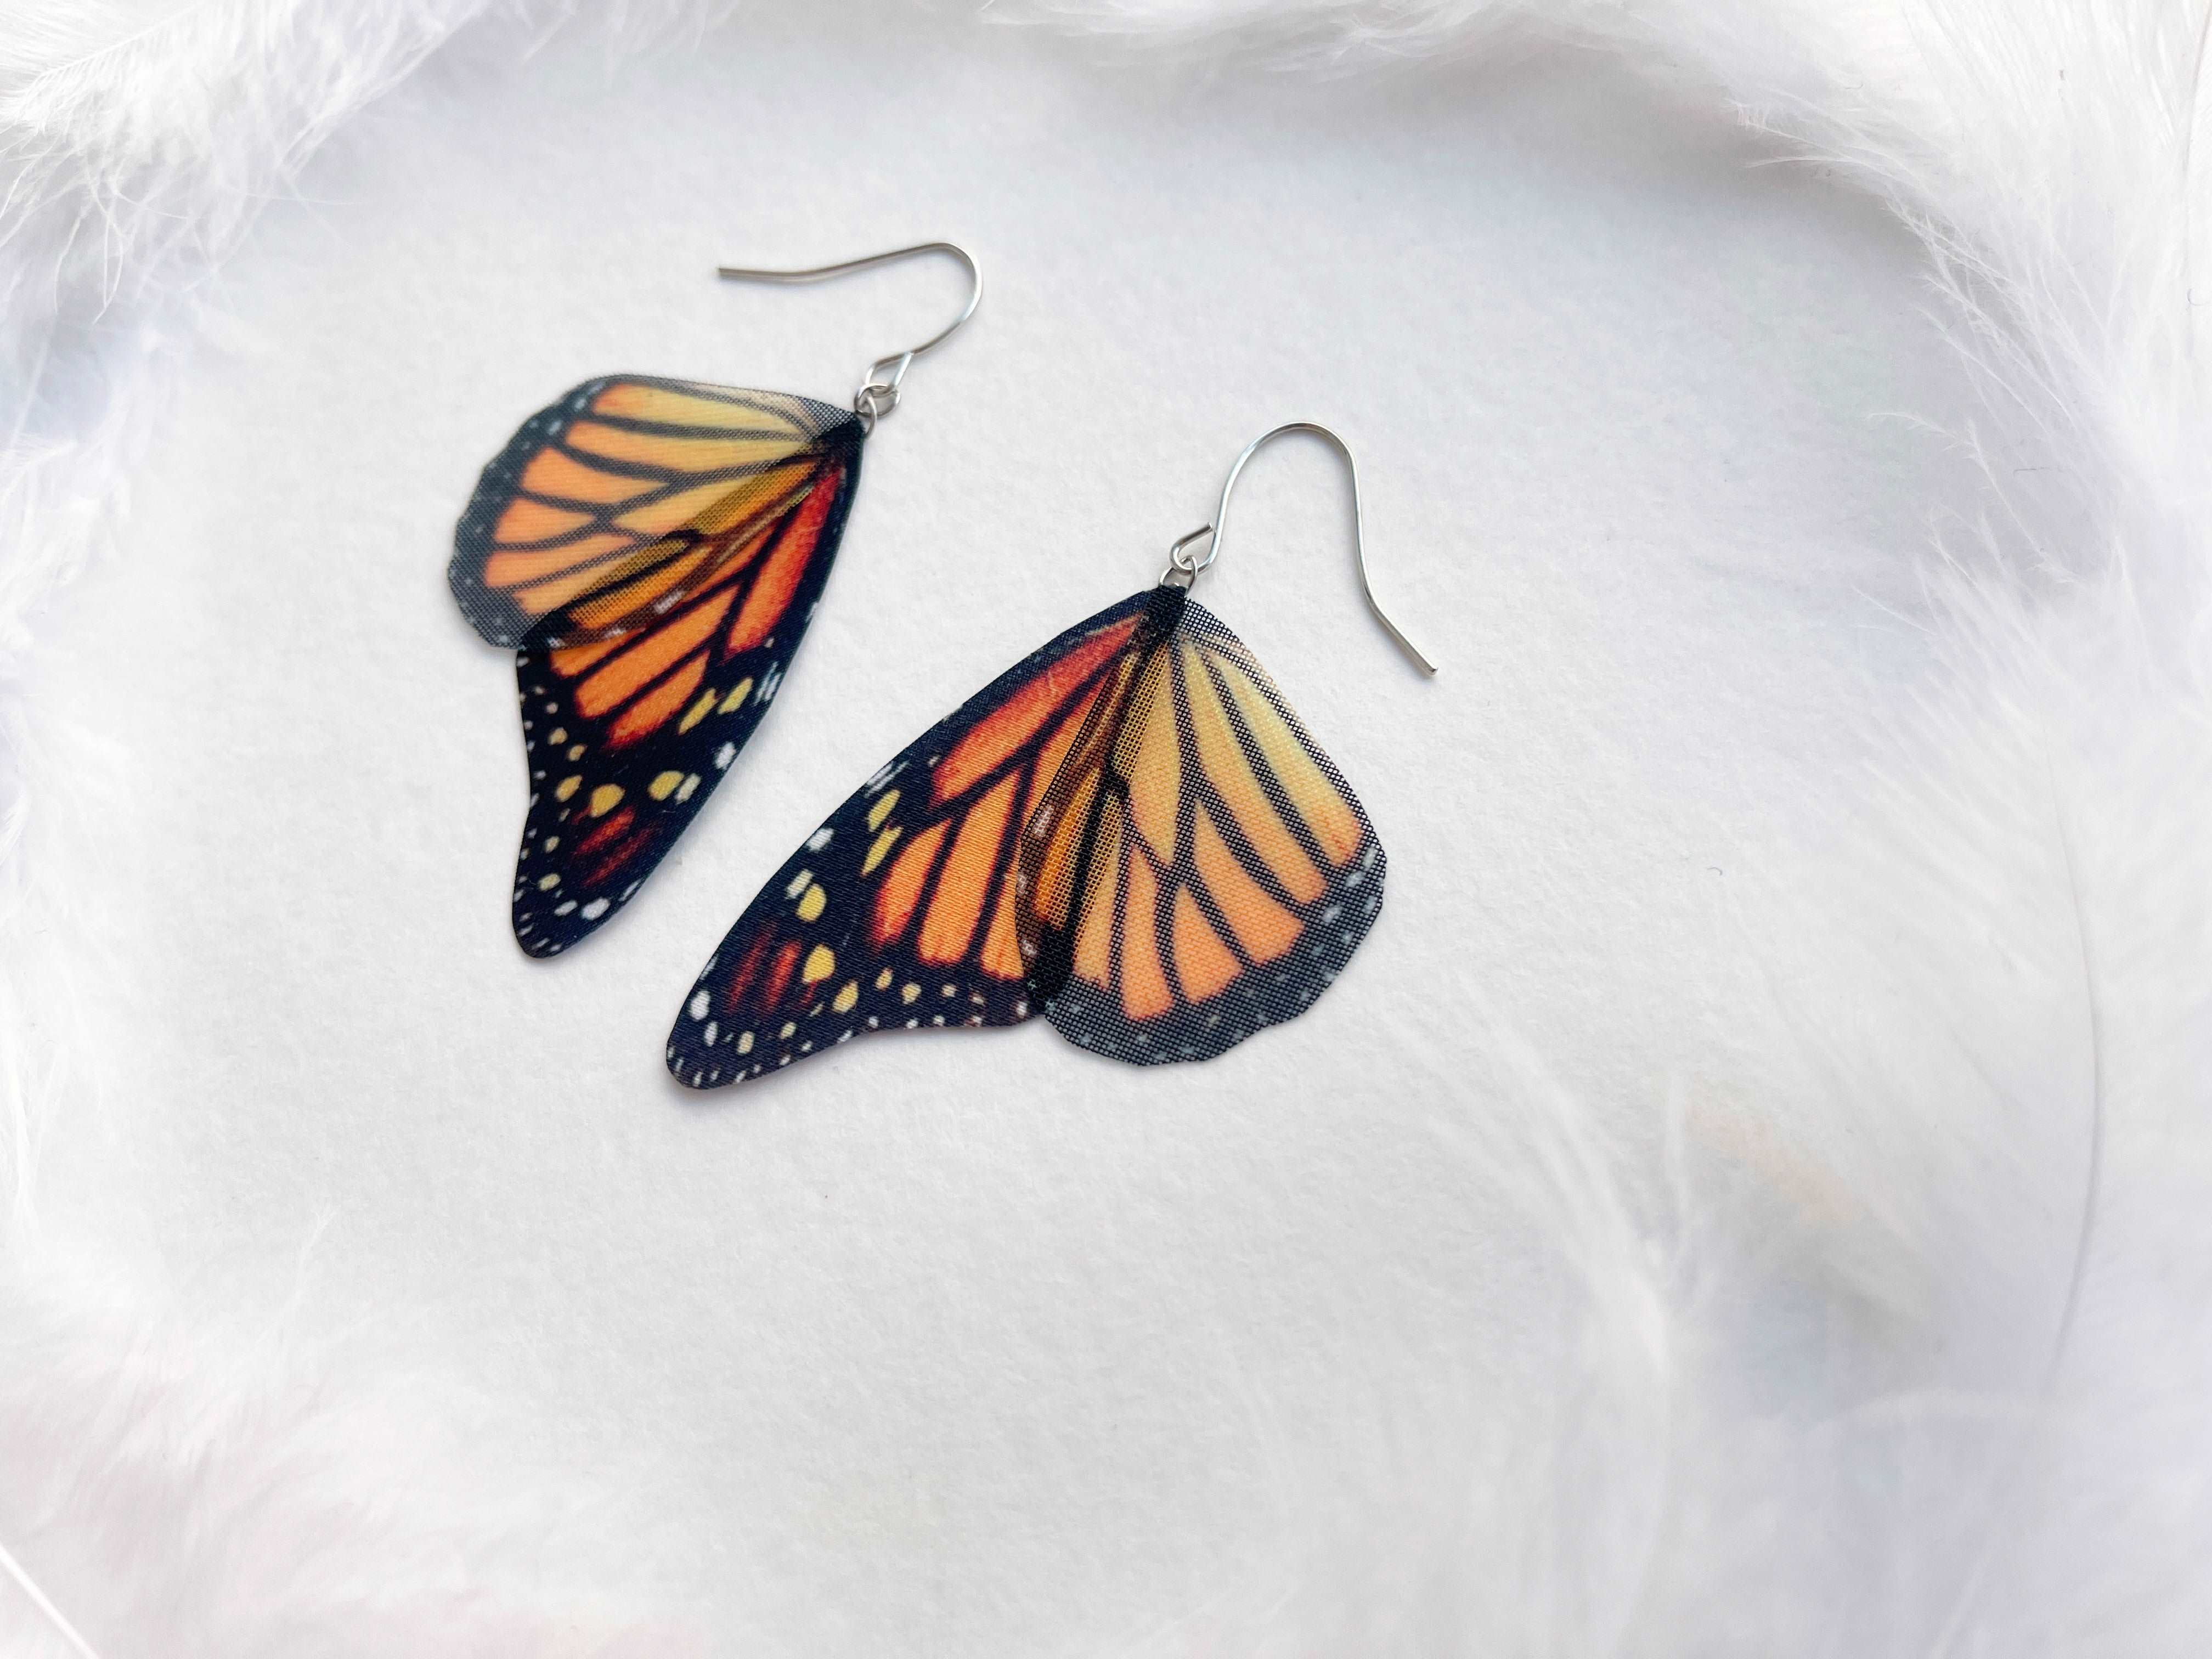 HANDMADE INNER AND OUTER MONARCH BUTTERFLY WING EARRINGS - FREE SHIPPING! |  eBay